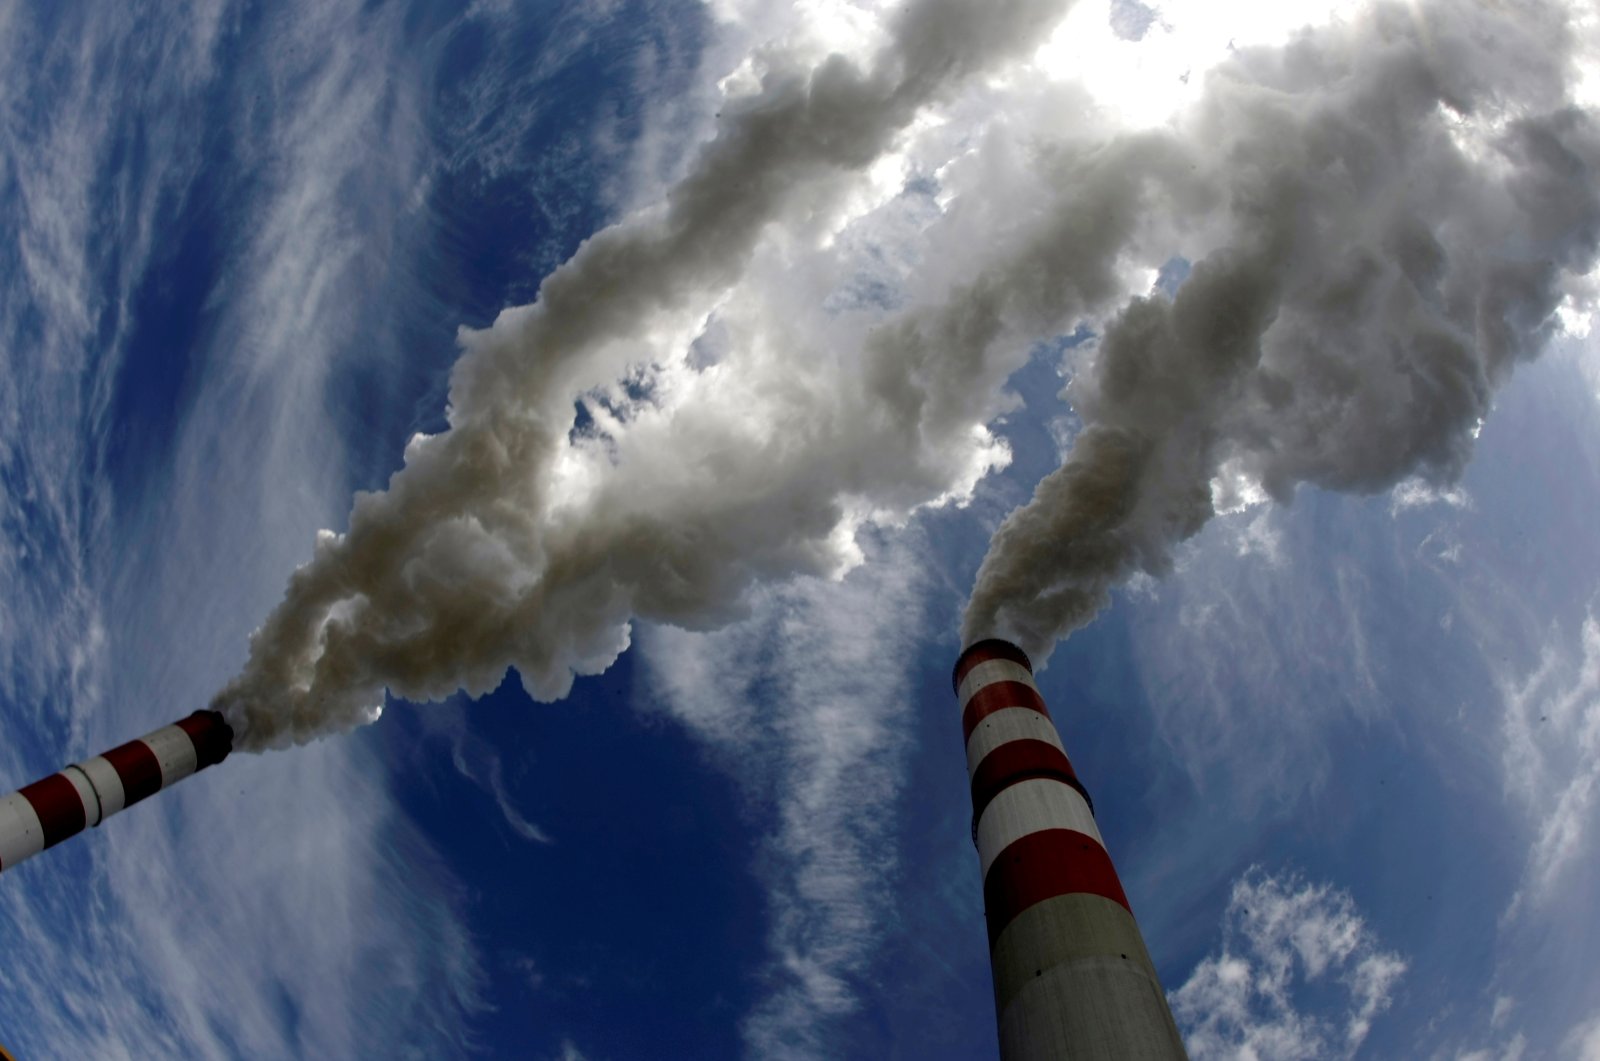 Smoke billows from the chimneys of Belchatow Power Station, Europe's biggest coal-fired power plant, near Belchatow, Poland, May 7, 2009. (Reuters Photo)